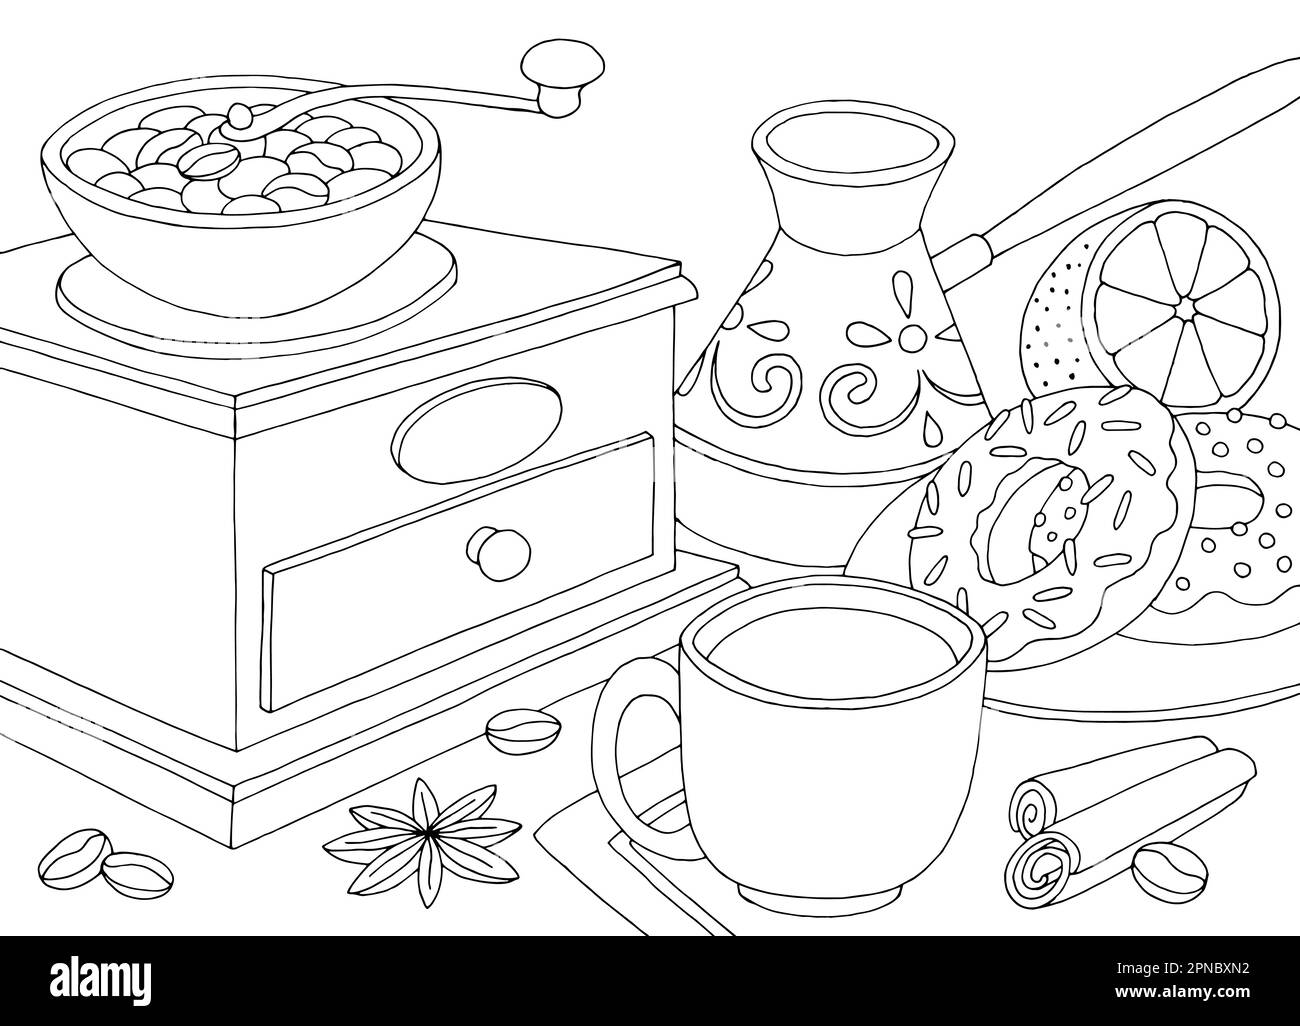 Coffee coloring food graphic black white sketch illustration vector Stock Vector